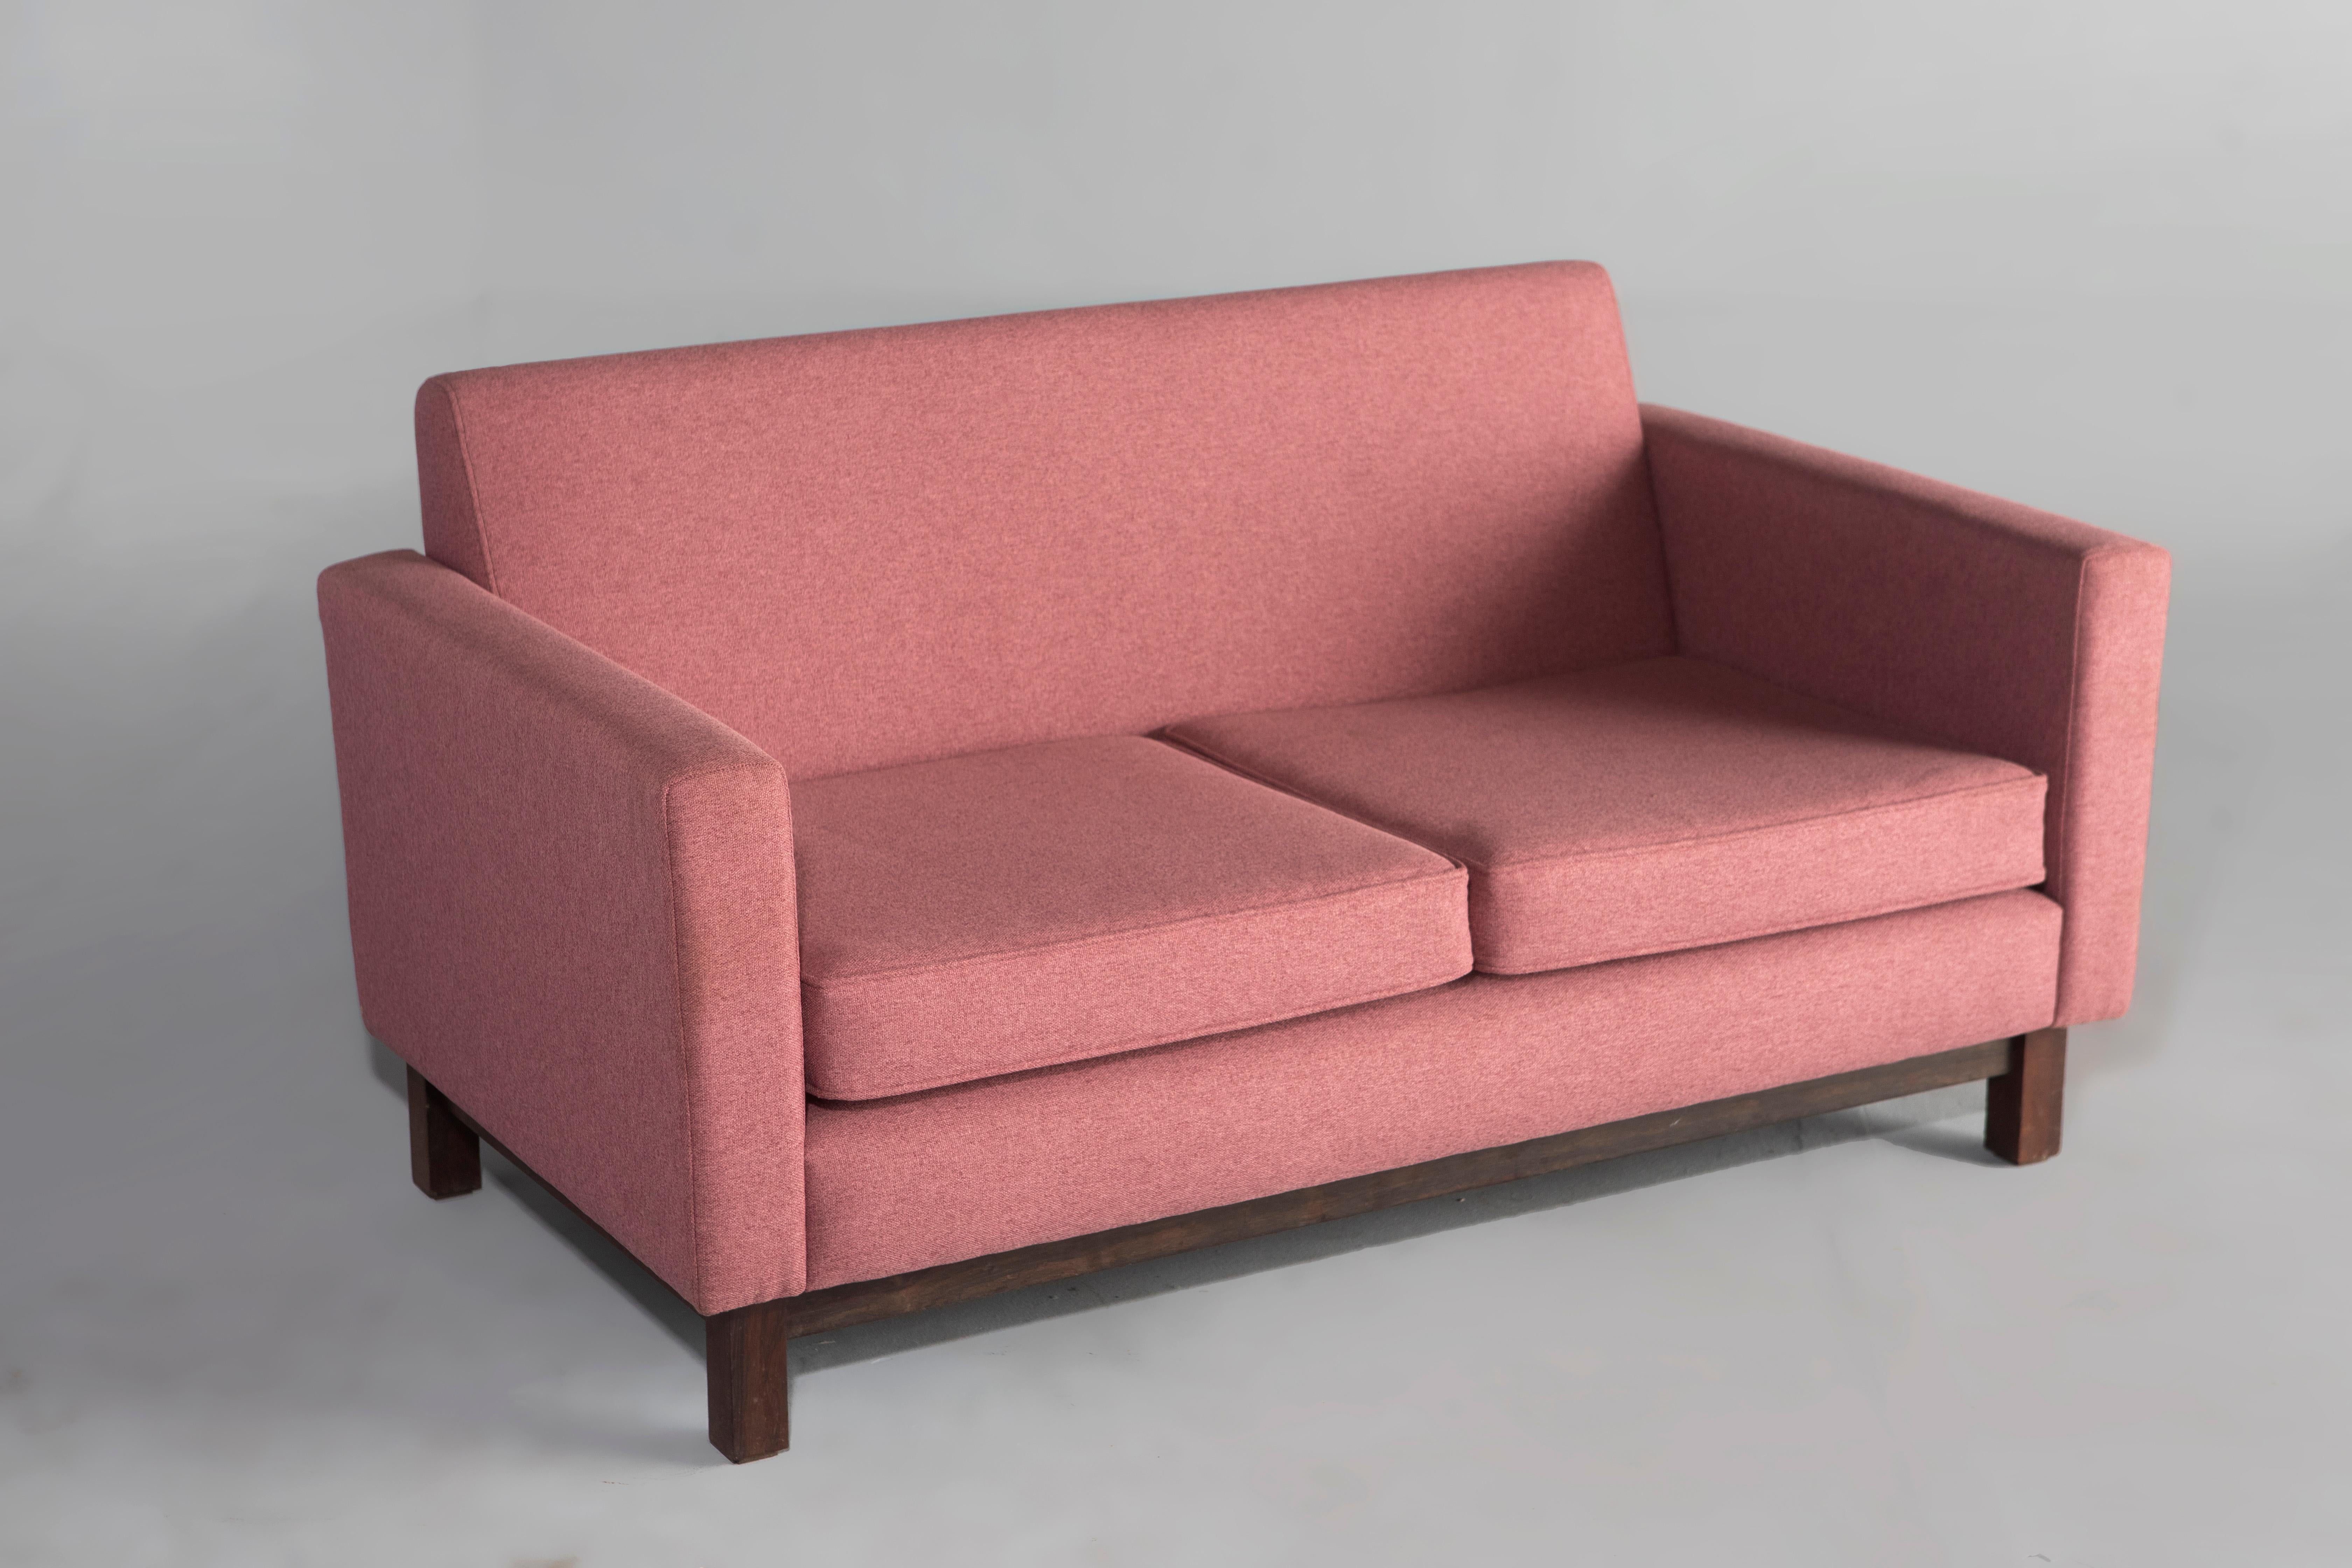 Mid-Century Modern sofa by Sergio Rodrigues, Brazil, 1960s

The two-seater sofa designed by Sergio Rodrigues and manufactured by OCA in Brazil in the 1960s is a timeless piece of furniture that effortlessly combines style and comfort. 

The sofa's